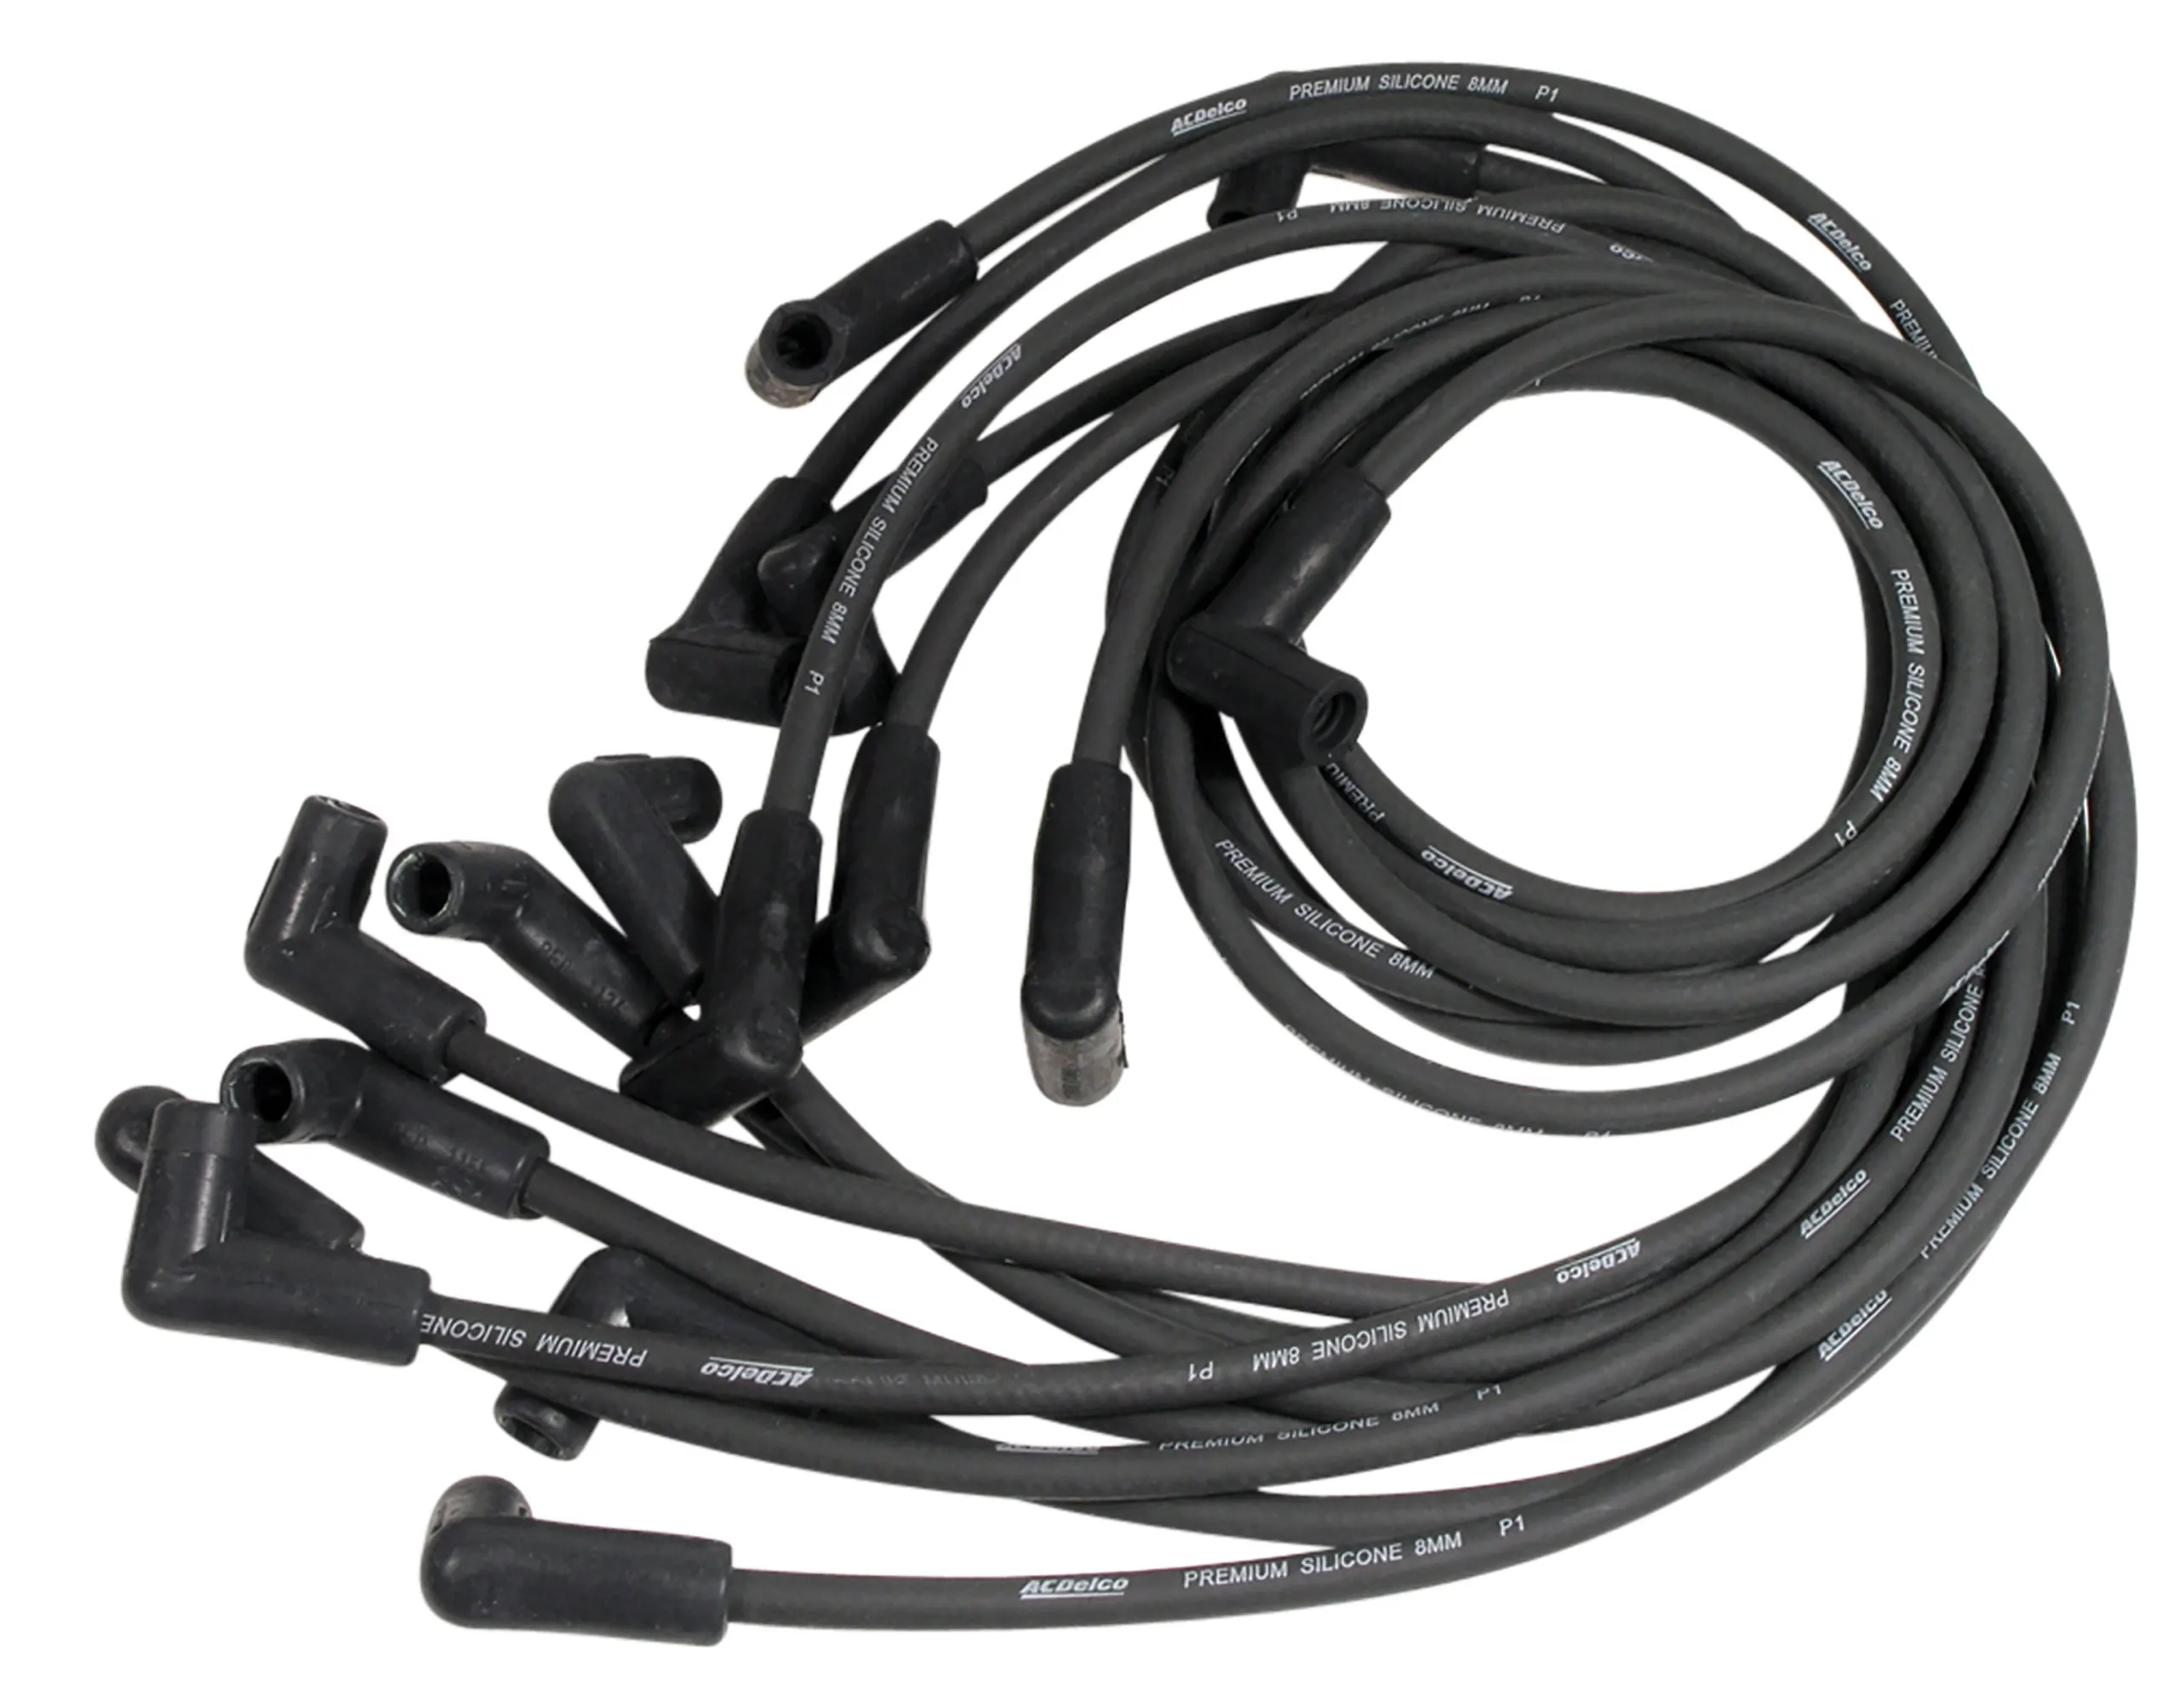 C3 1975-1982 Chevrolet Corvette Spark Plug Wires. High Energy Ignition Delco Replacement - Lectric Limited, Inc.